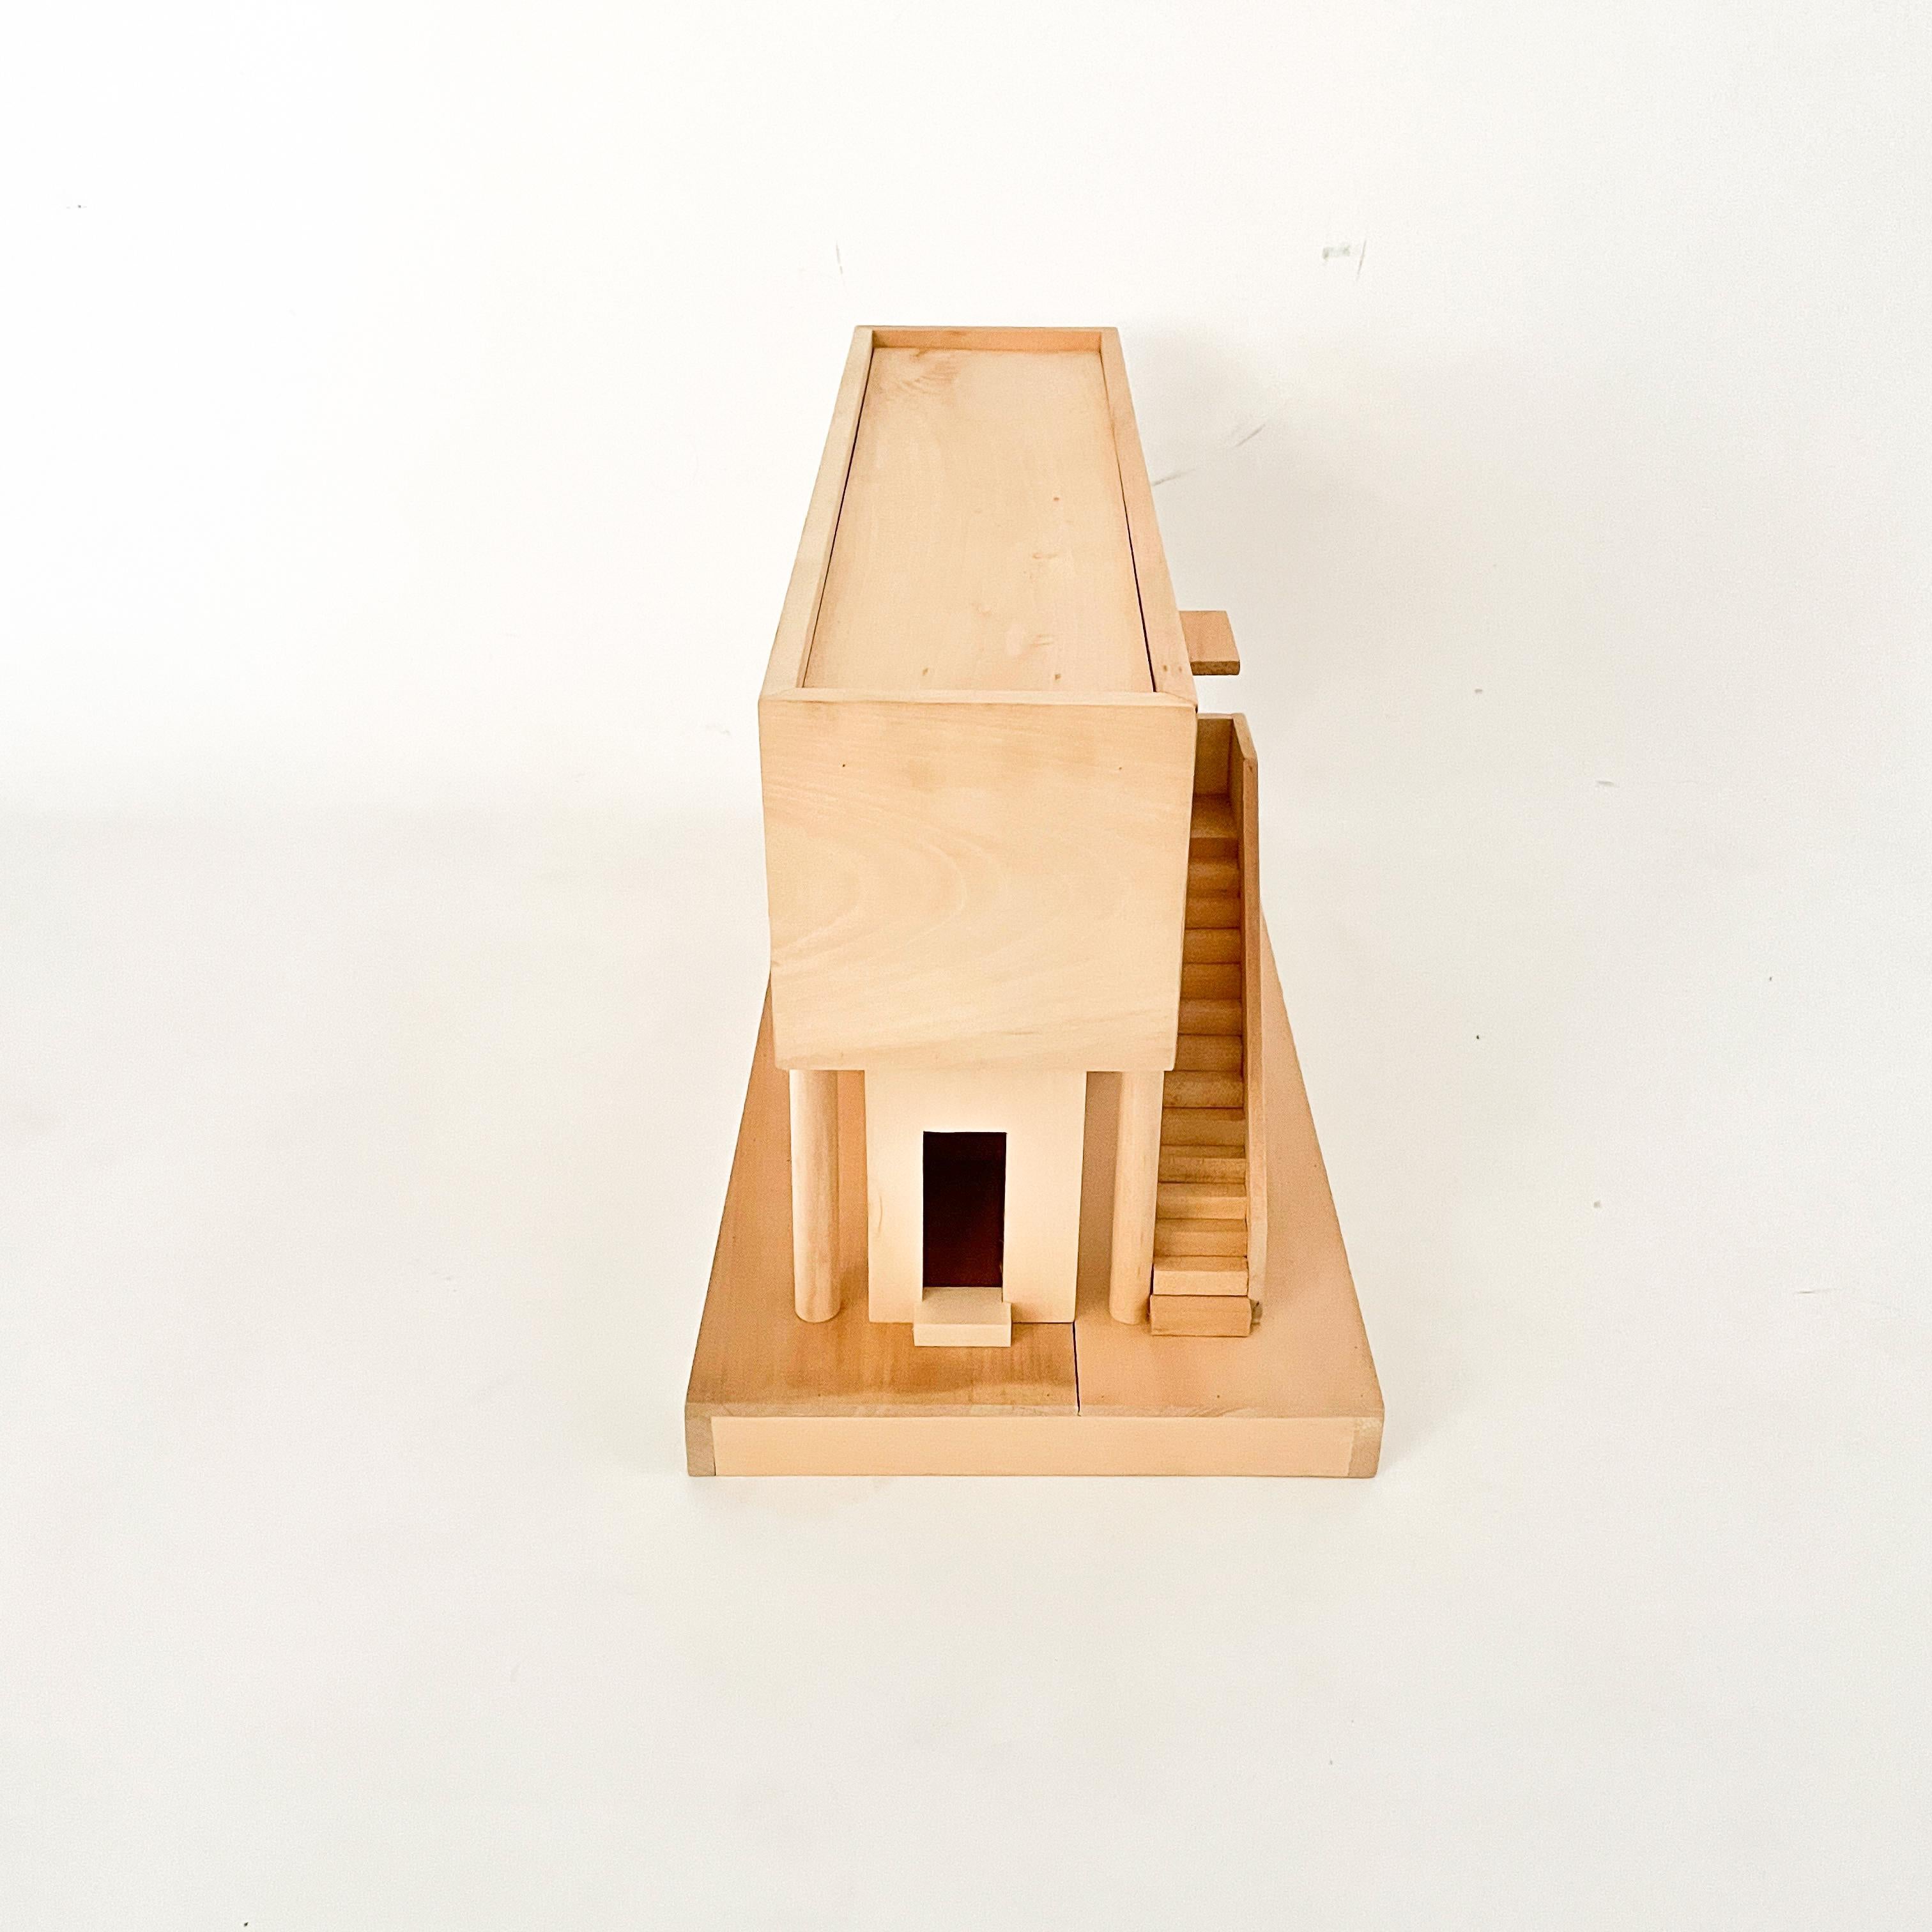 Contemporary Wood Architectural Model, C. 2000's For Sale